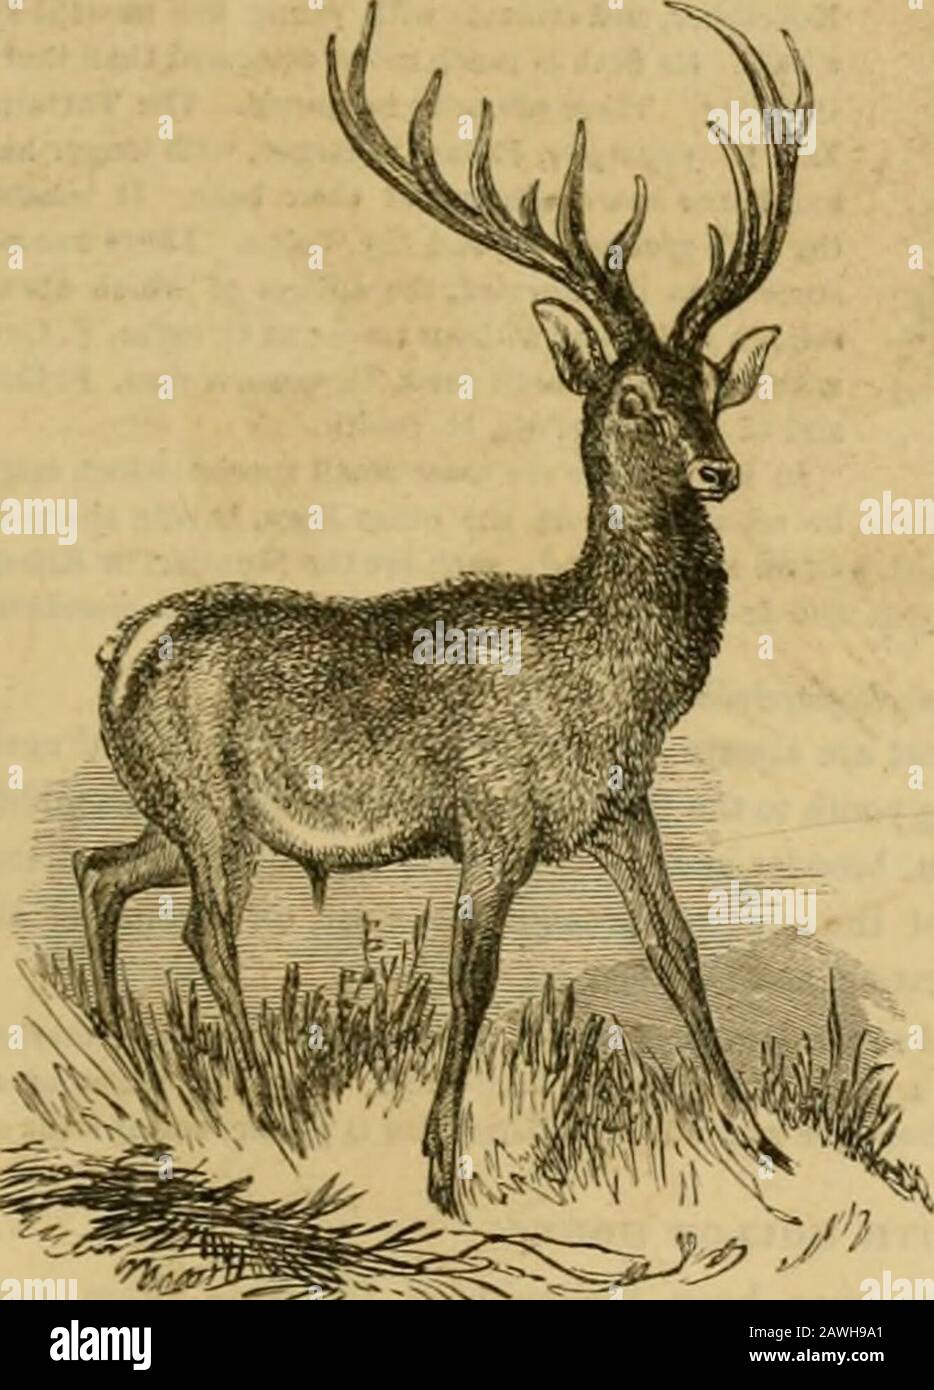 The animal kingdom : arranged after its organization, forming a natural history of animals, and an introduction to comparative anatomy . r edge dentelated. After a certain age itshrinks, and splits irregularly into several slips.This species, the Platyceros of the ancients, has be-come common throughout Europe, but appears tohave been originally from Barbary. A blackish varietywithout spots [even in the fawns] is not unconnnon.Tlie species with round antlers are more nume-rous. Those of temperate climates change colour,more or less, with the seasons. The Common Stag, or Red Deer (C. elephas,Li Stock Photo